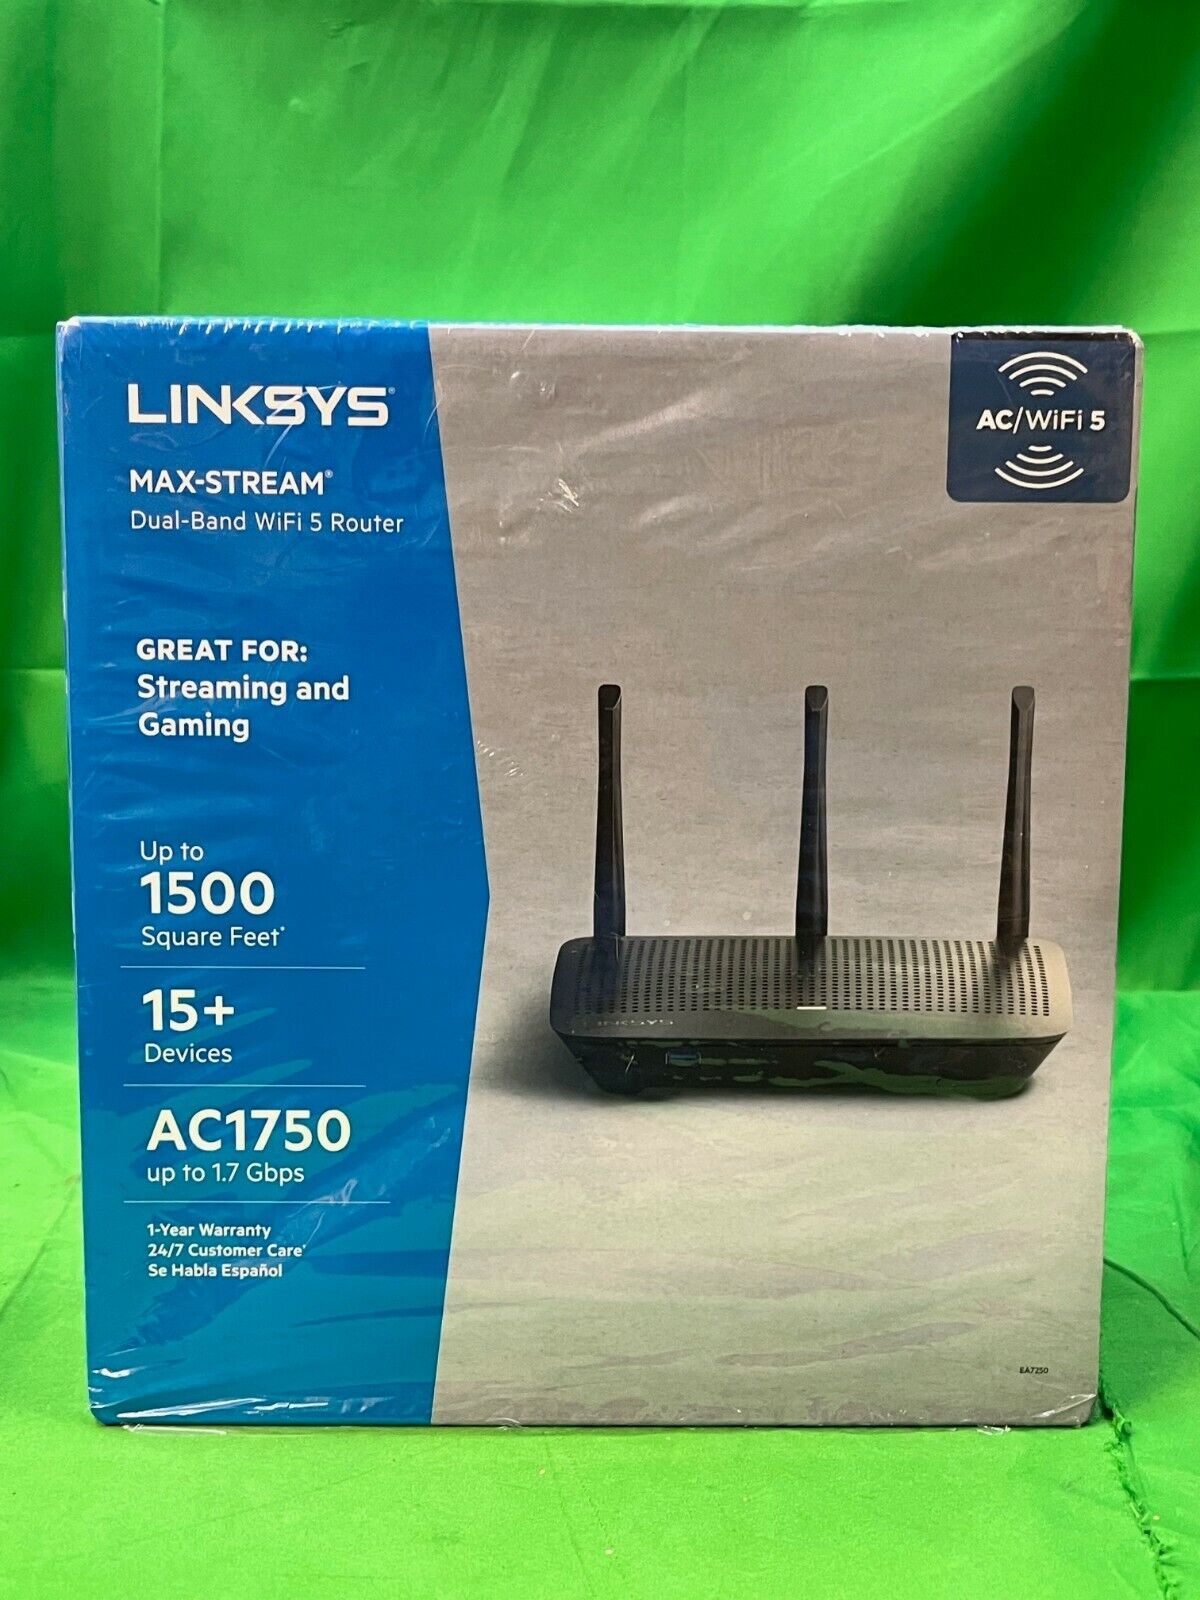 New Linksys Max-Stream AC1750 - Dual-Band WiFi 5 Router, Black (E5-2)